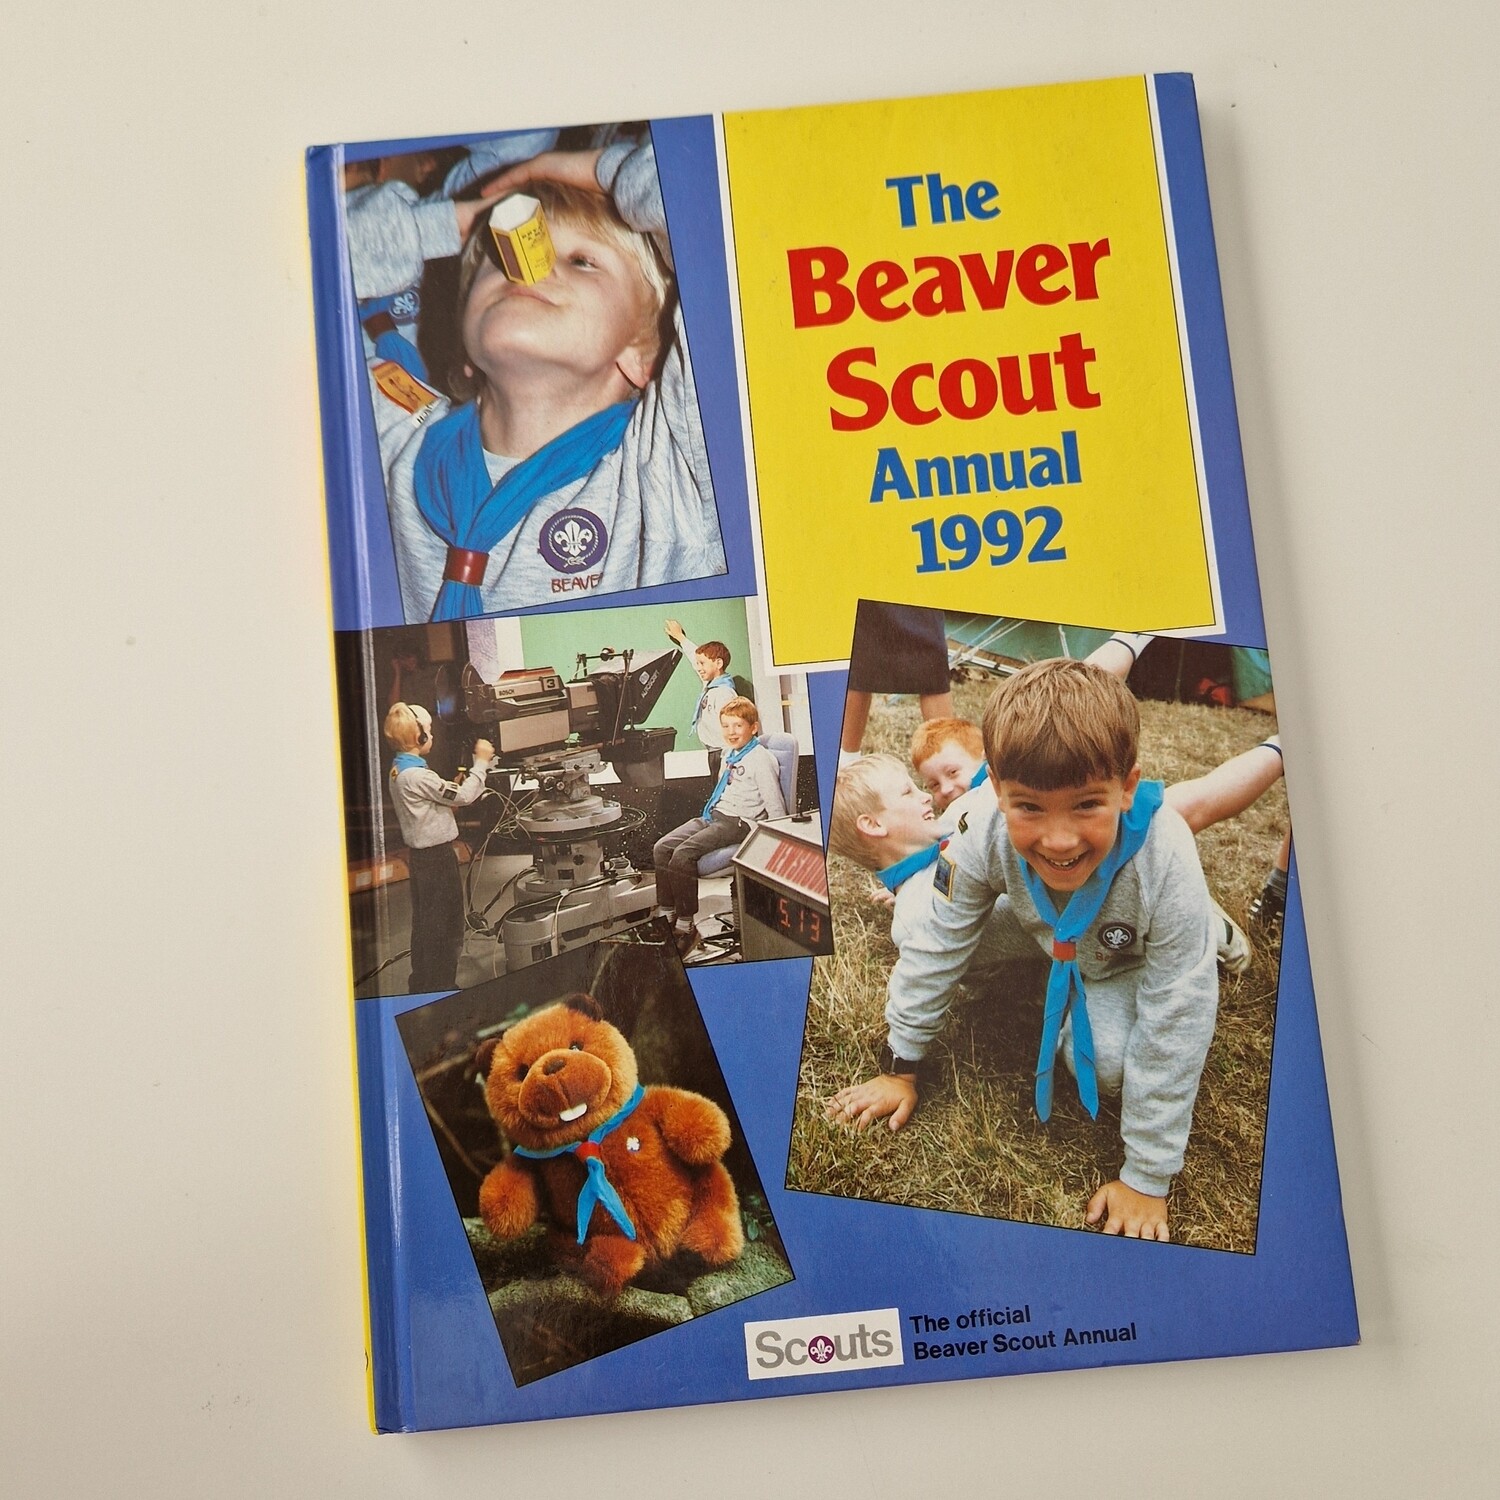 The Beaver Scout Annual 1992